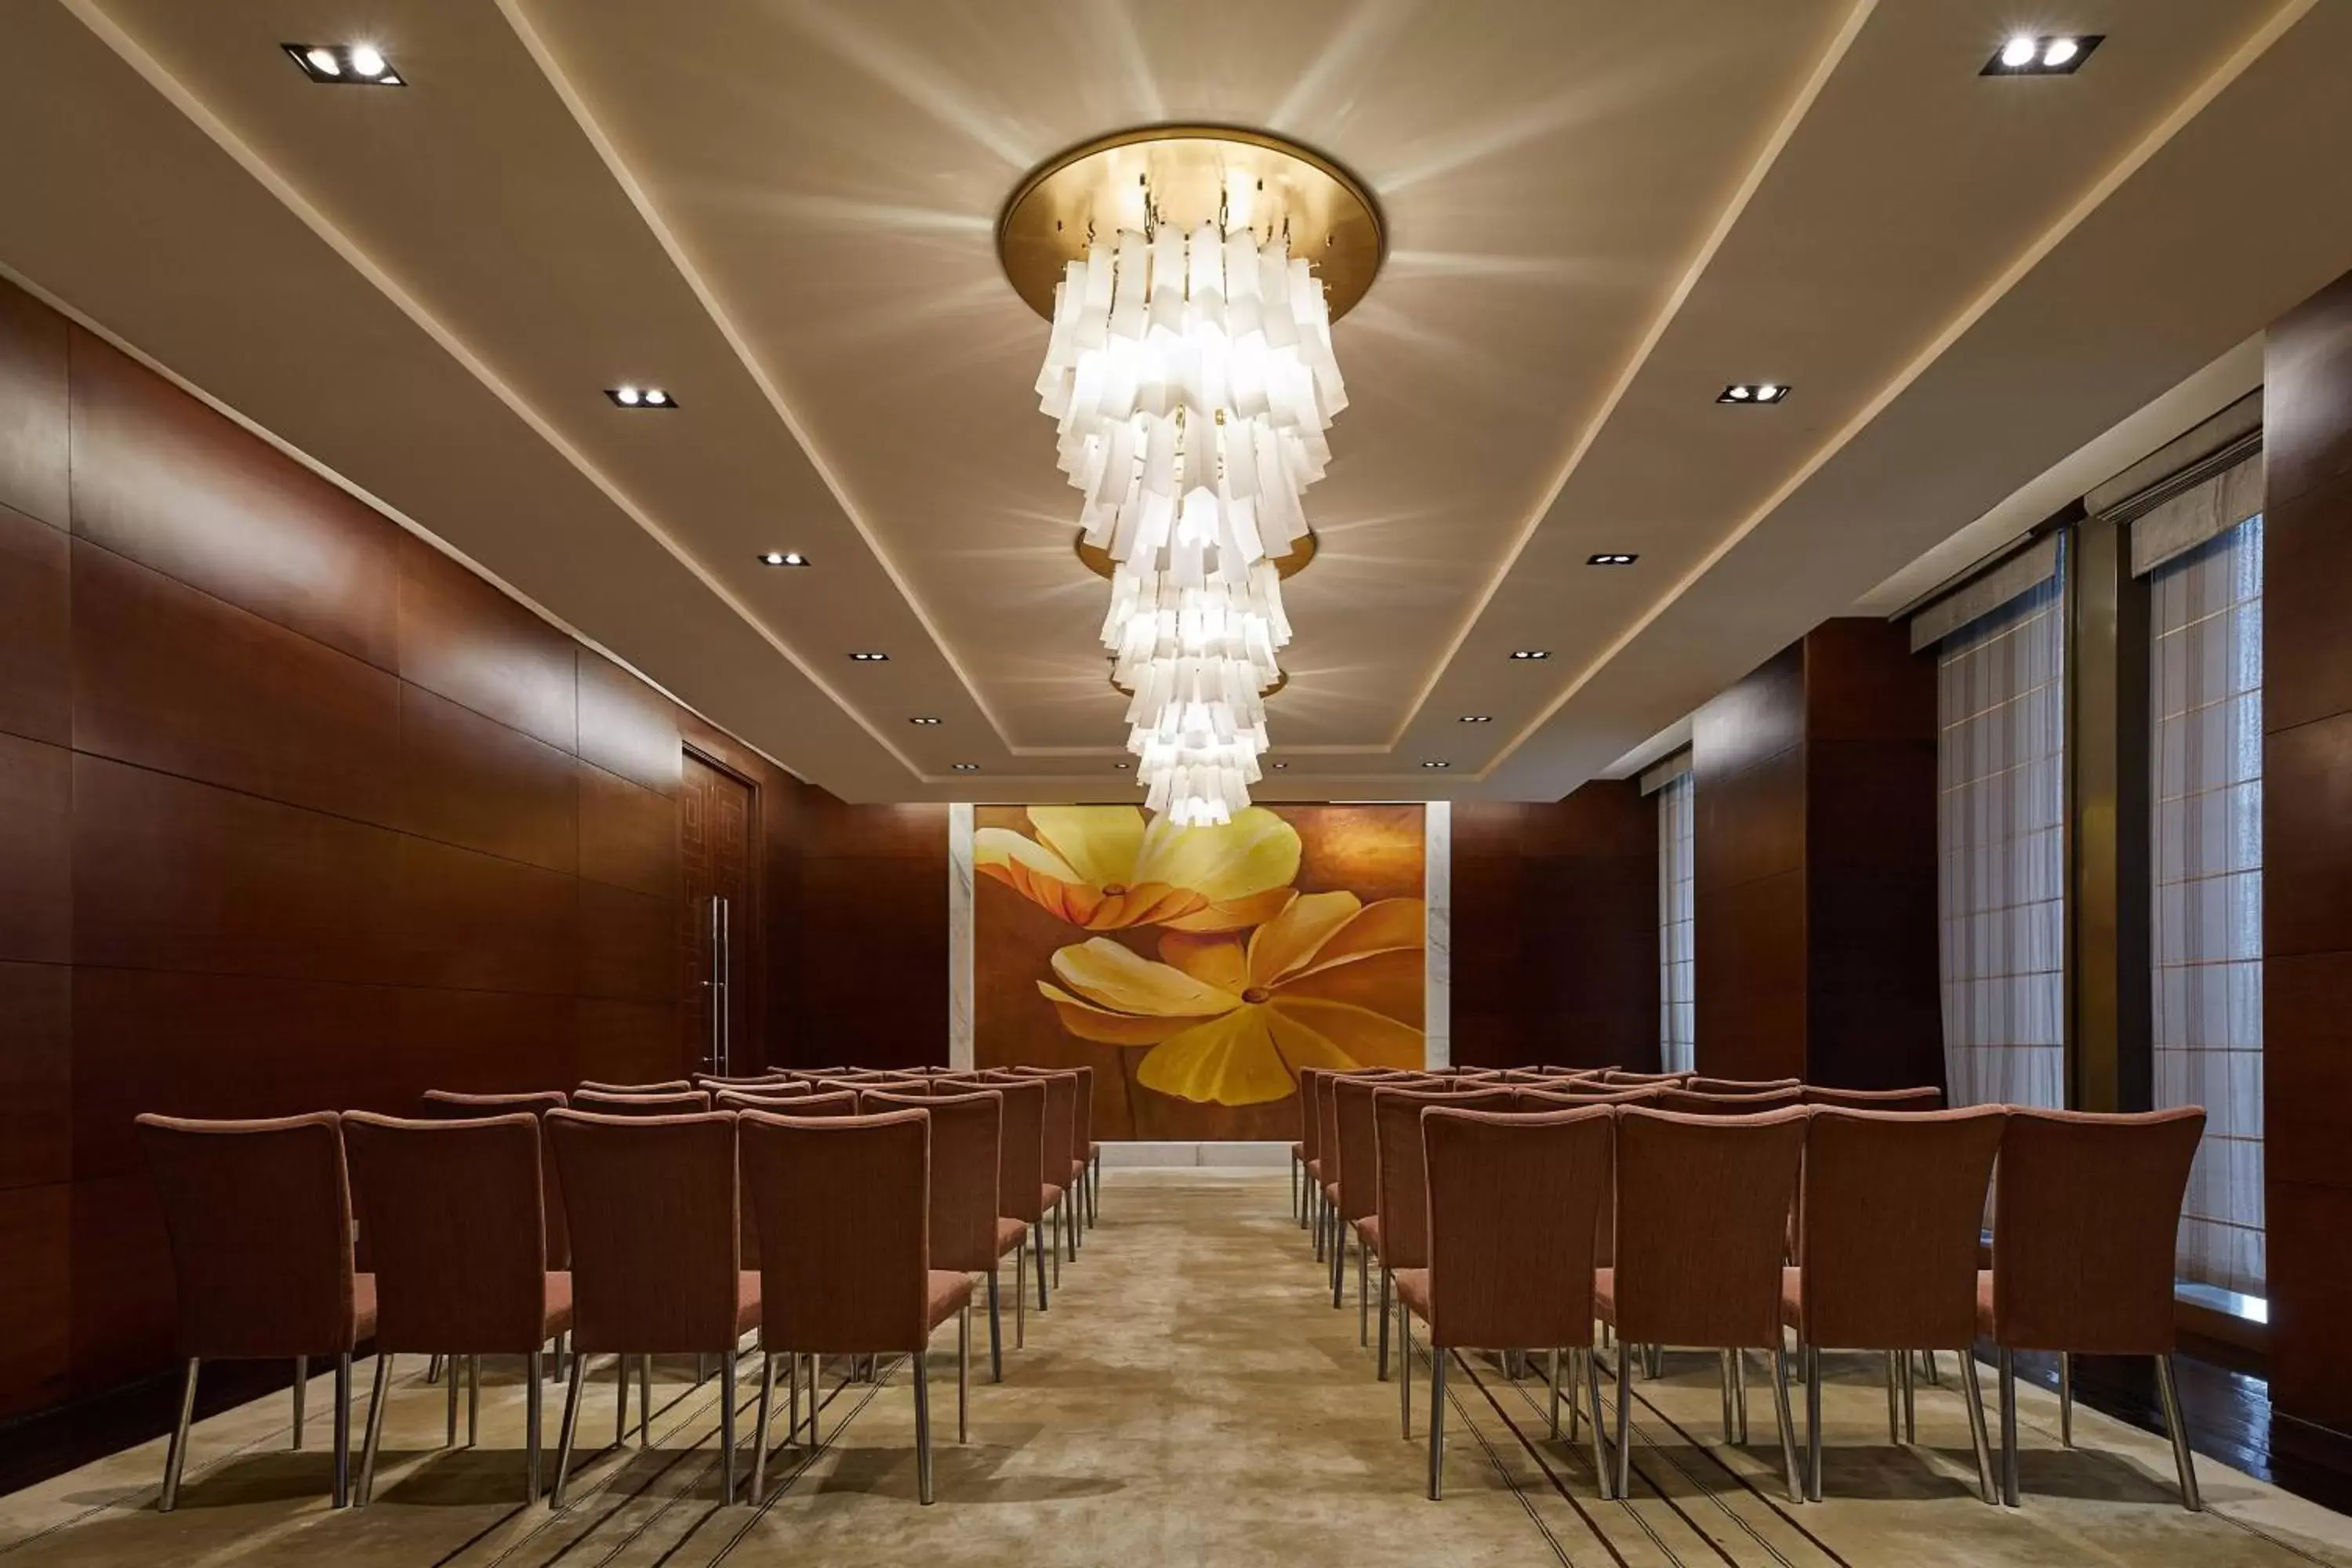 Meeting/conference room, Banquet Facilities in The Westin Tianjin